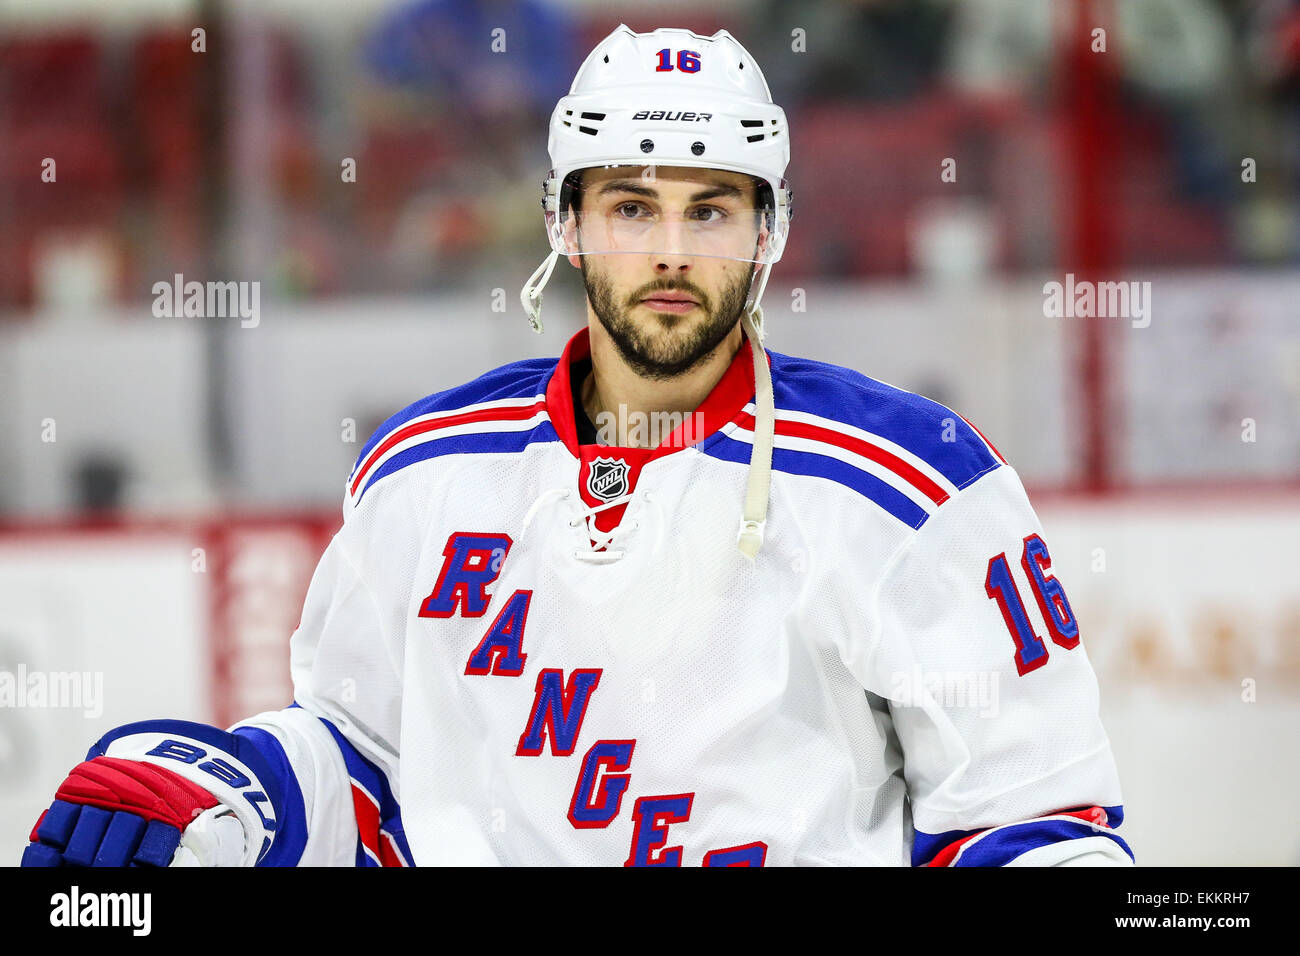 Nhl entry draft hi-res stock photography and images - Alamy